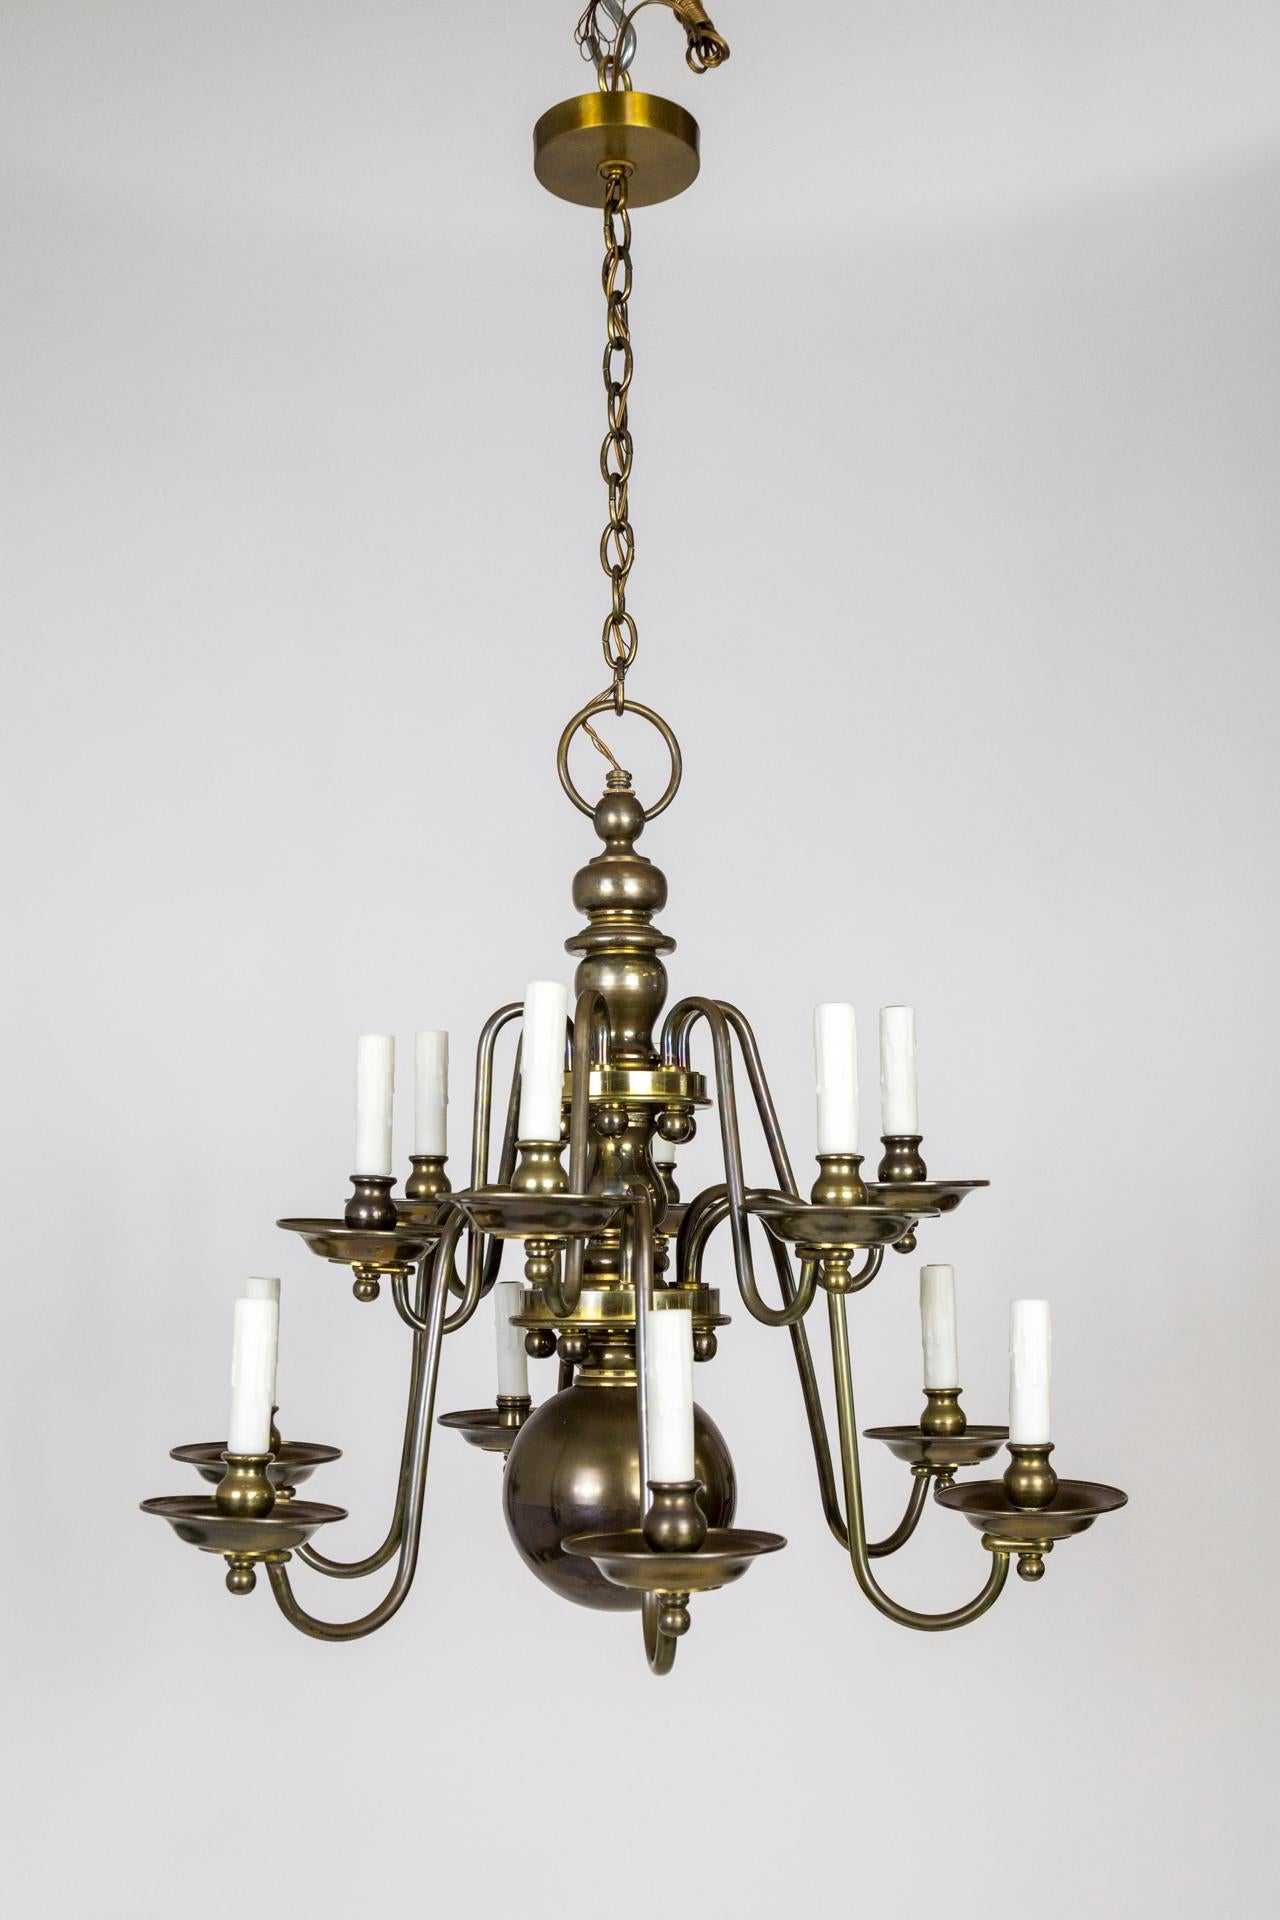 A chunky, heavy brass, Dutch Baroque style, 12-light chandelier, marvelously proportioned with huge center ball and smaller ball accents at the arms, center support, and bobeches. A lovely patina with subtle iridescence in areas, 1920. Newly